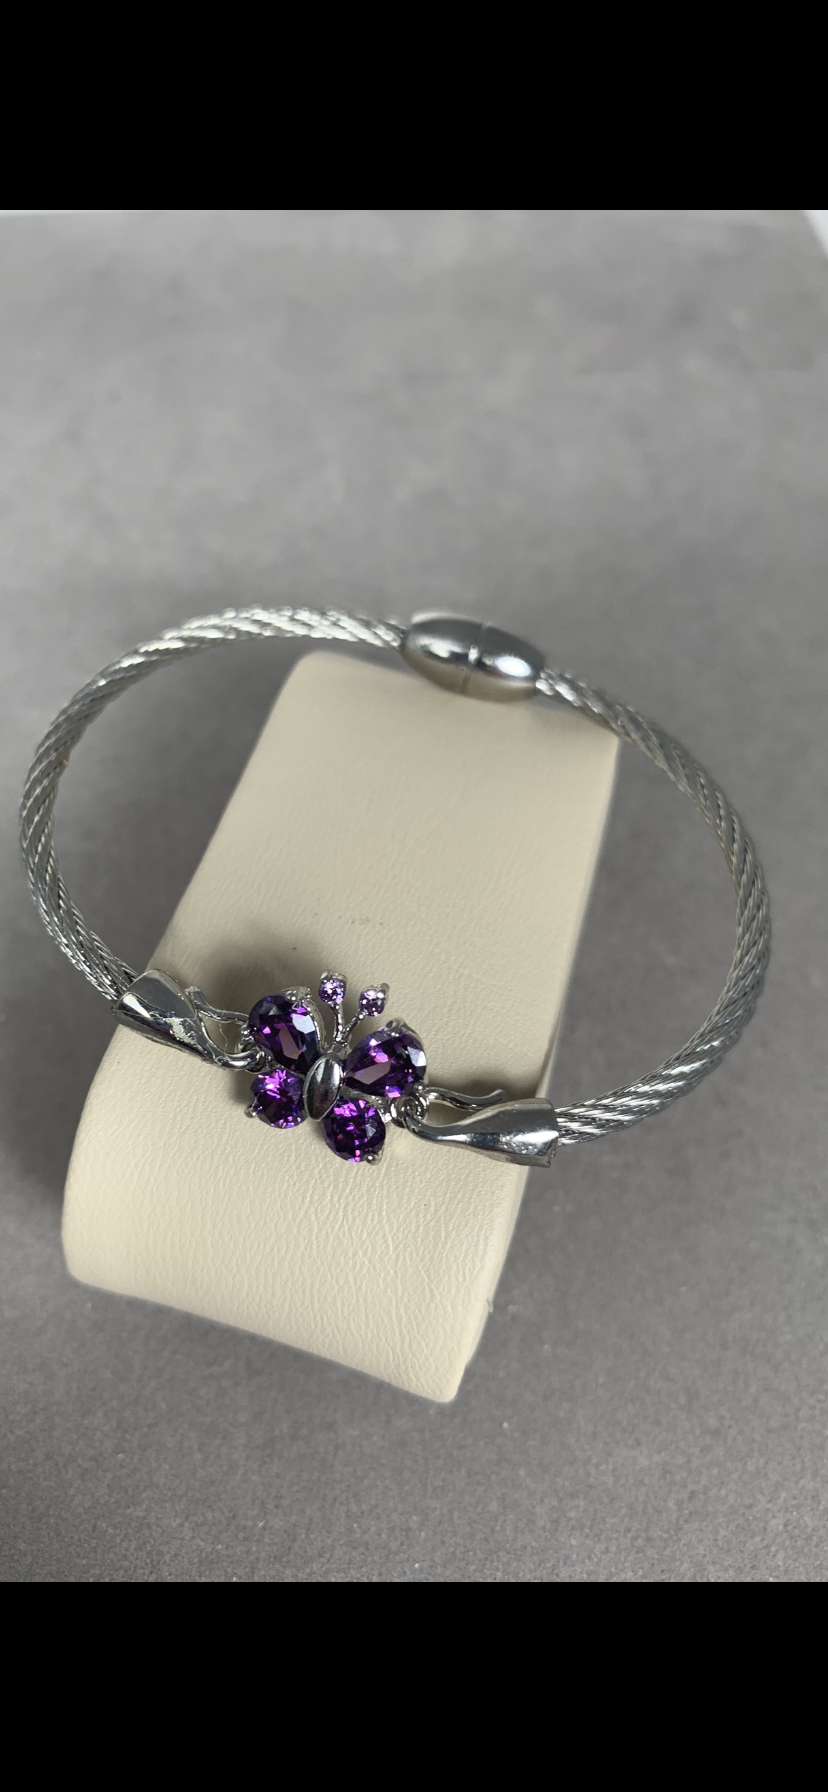 Silver Tone Wire Bangle Bracelet featuring Purple Crystal Butterfly